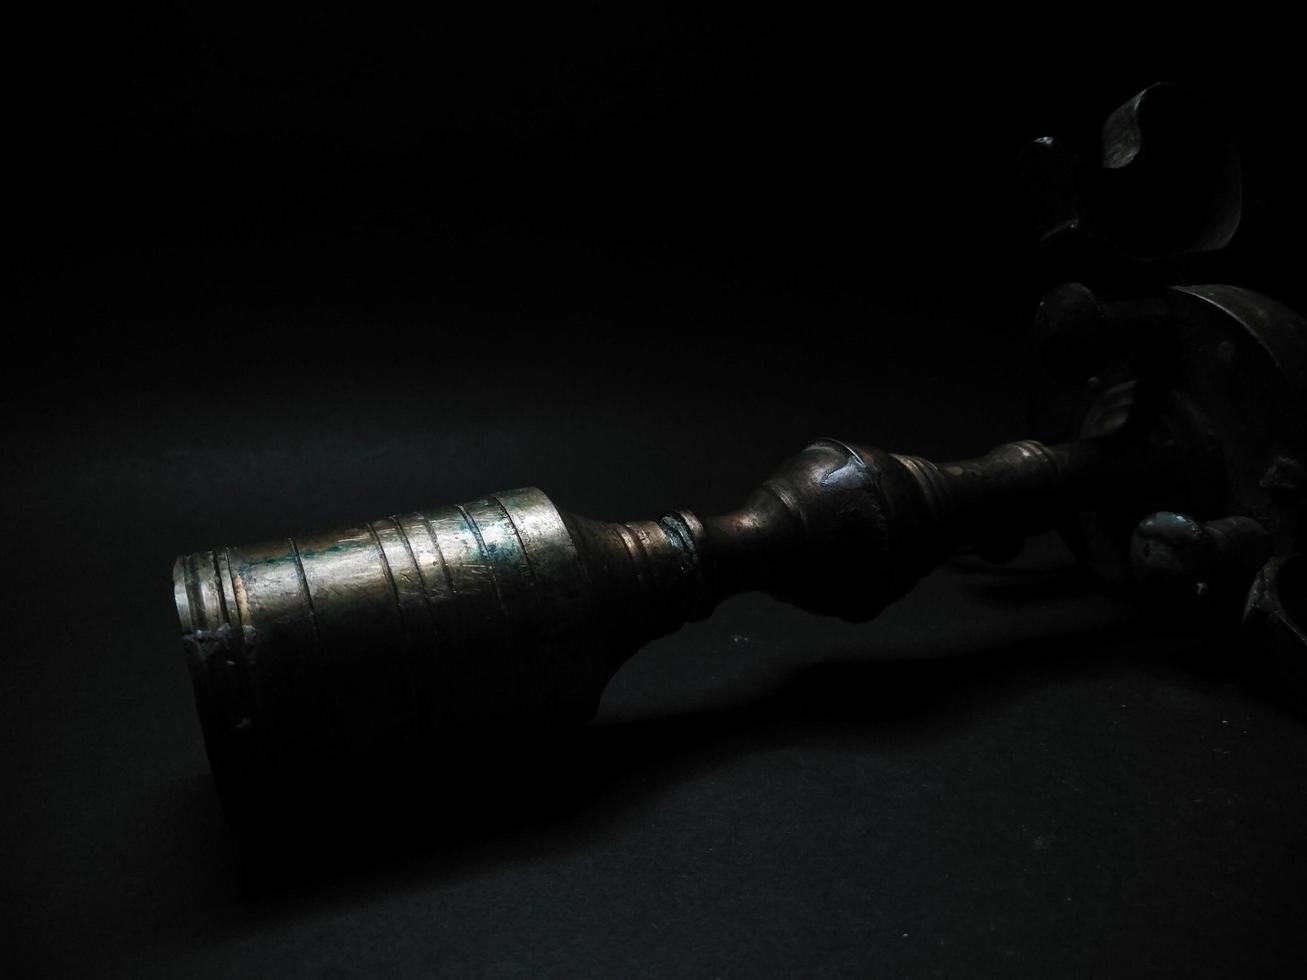 candle holder on a black background photo